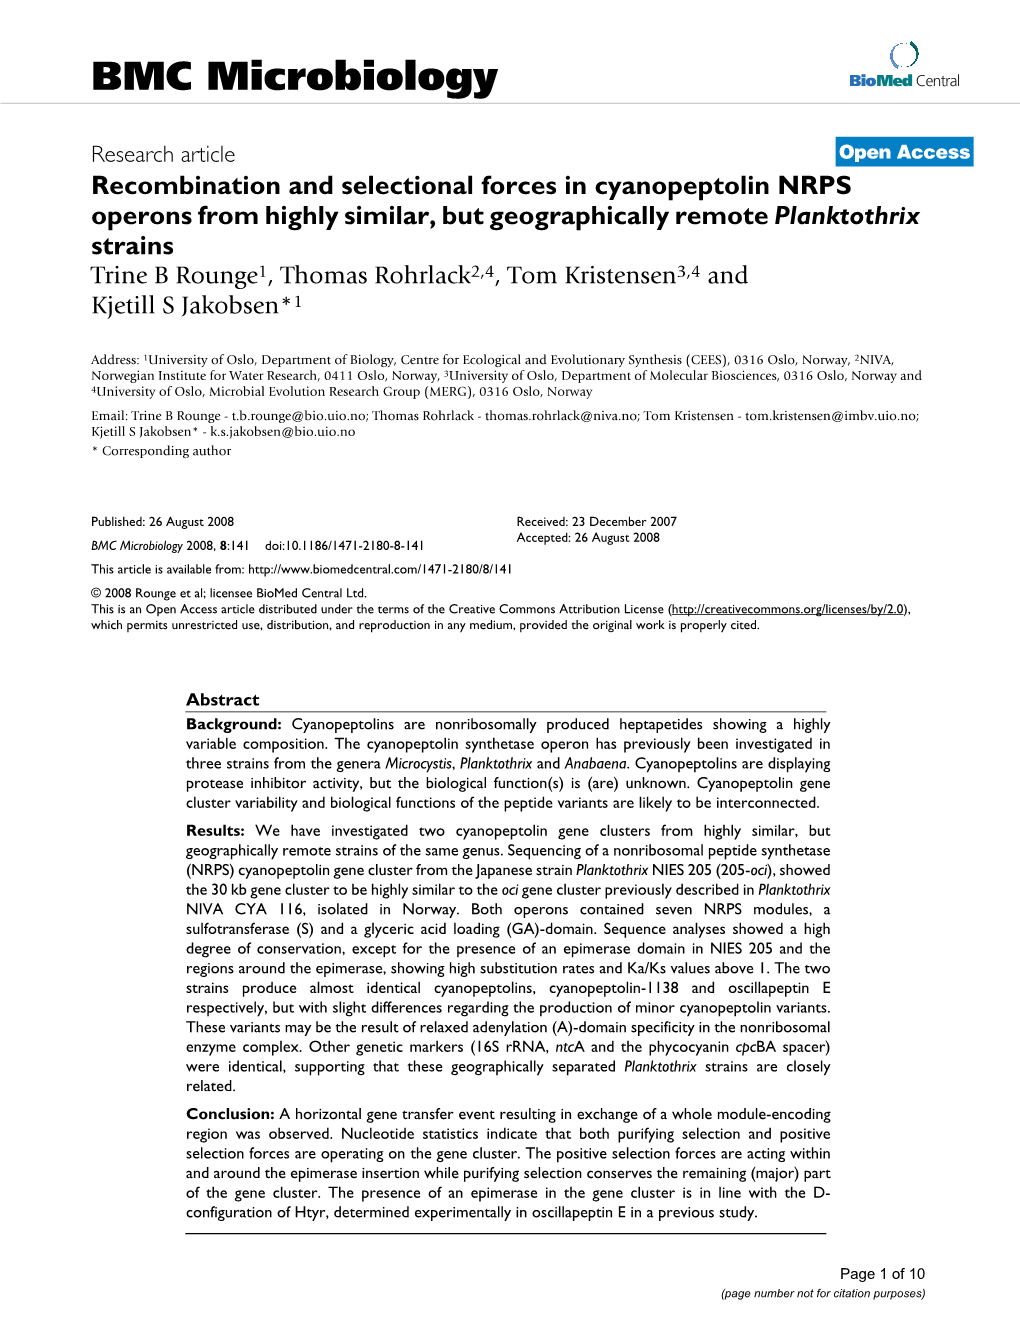 Recombination and Selectional Forces in Cyanopeptolin NRPS Operons